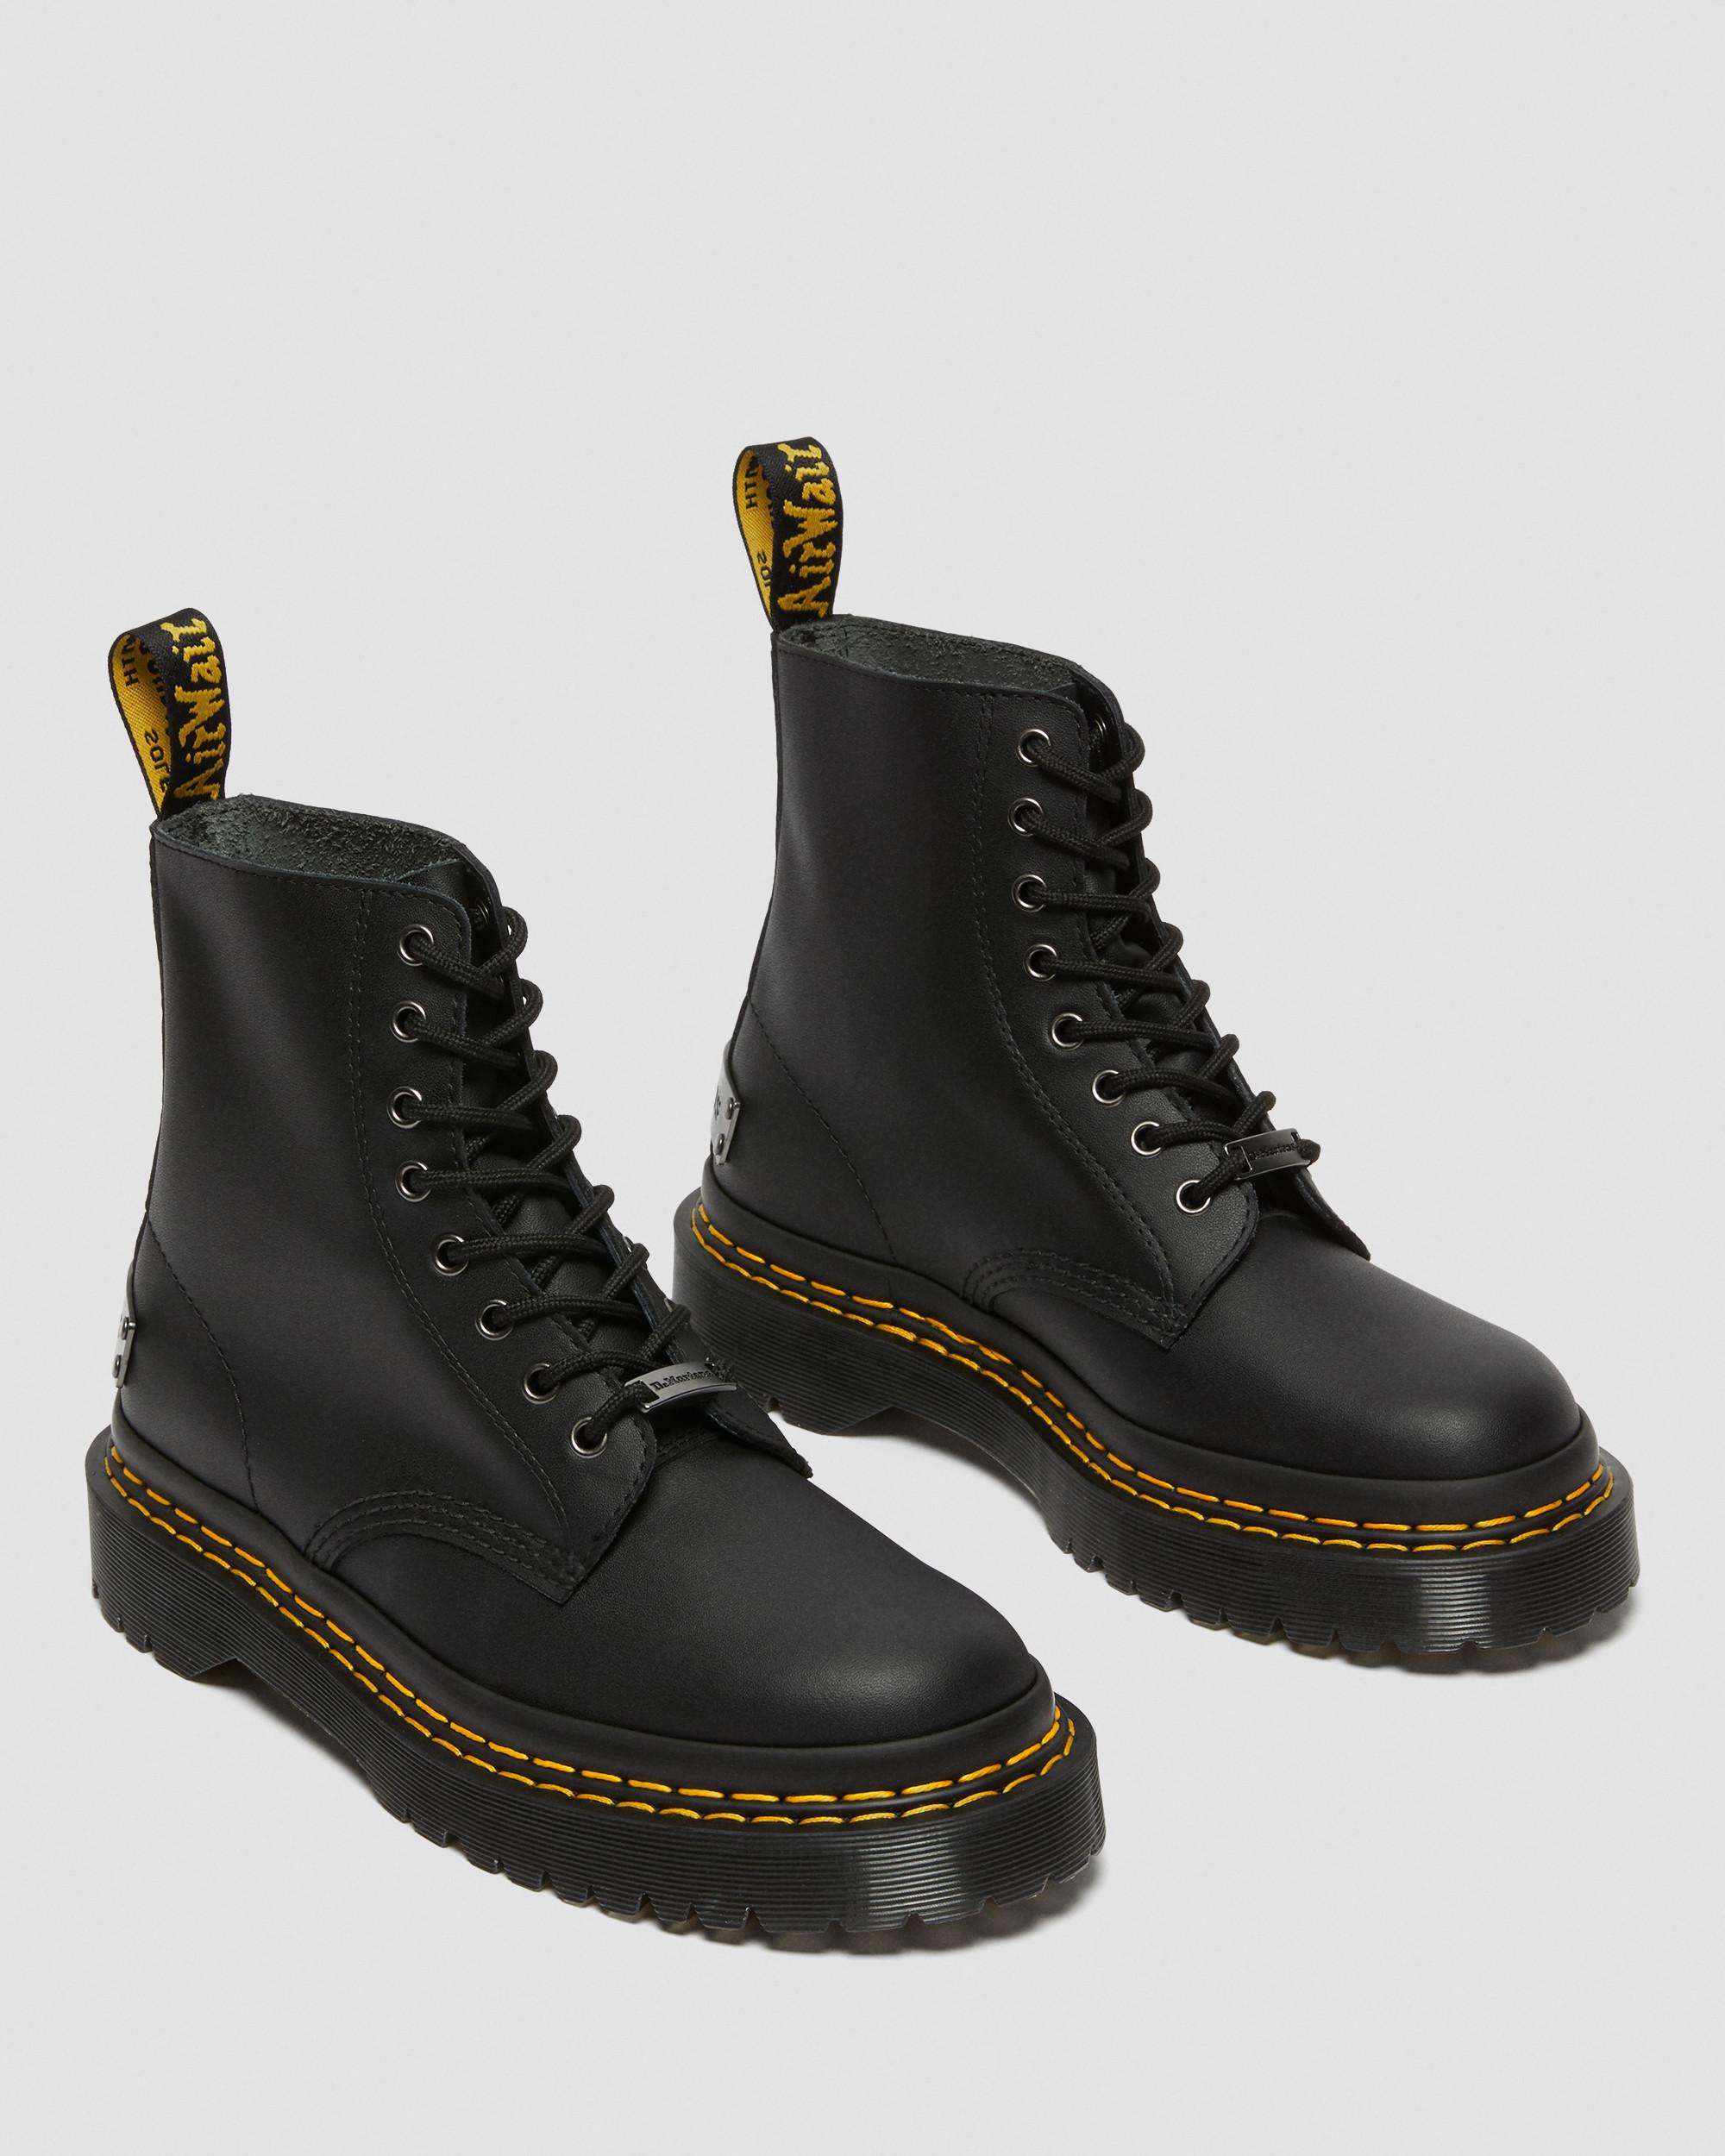 1460 Bex Double Stitch Leather Boots in Black | Dr. Martens